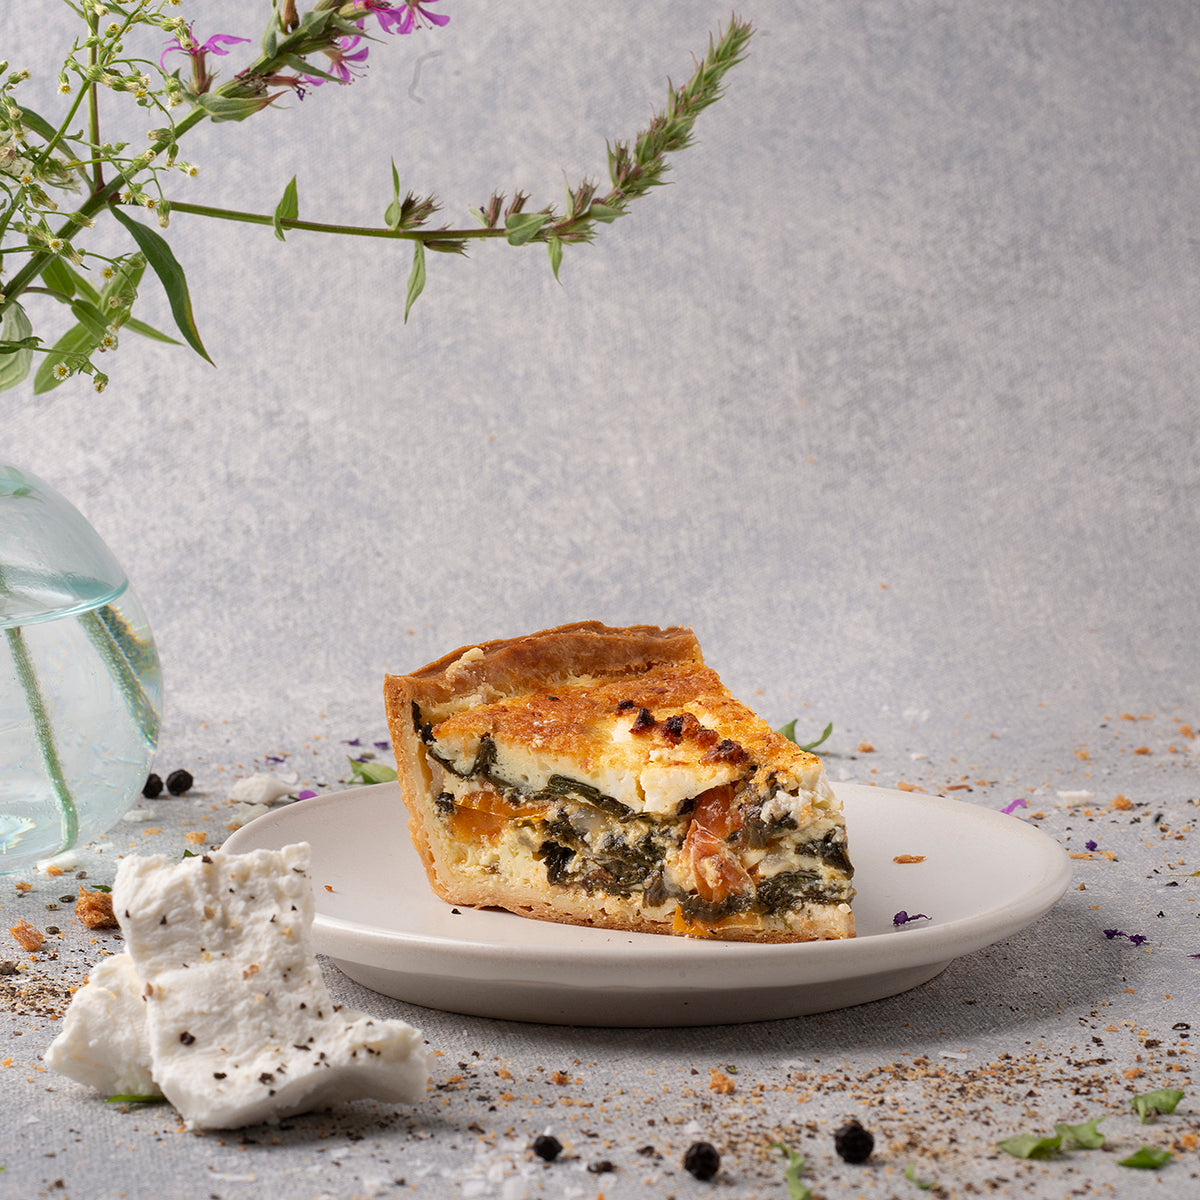 Spinach and Goat Cheese Quiche